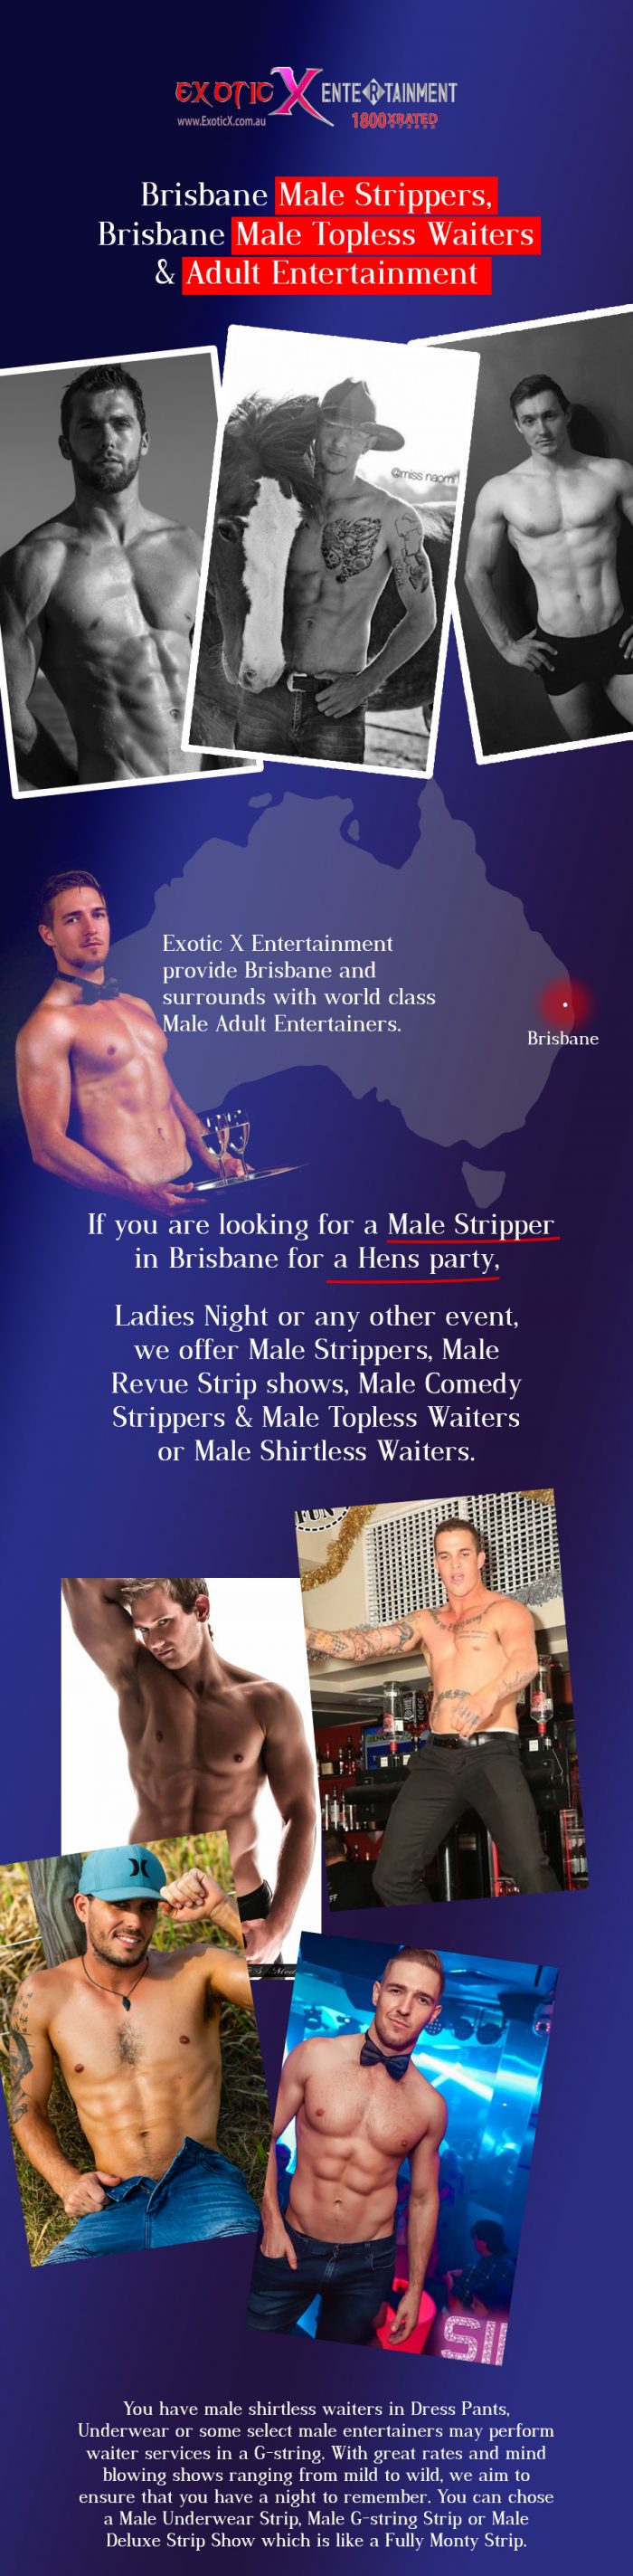 Hire Topless Waiters & Male Adult Entertainers in Brisbane from Exotic X Entertainment